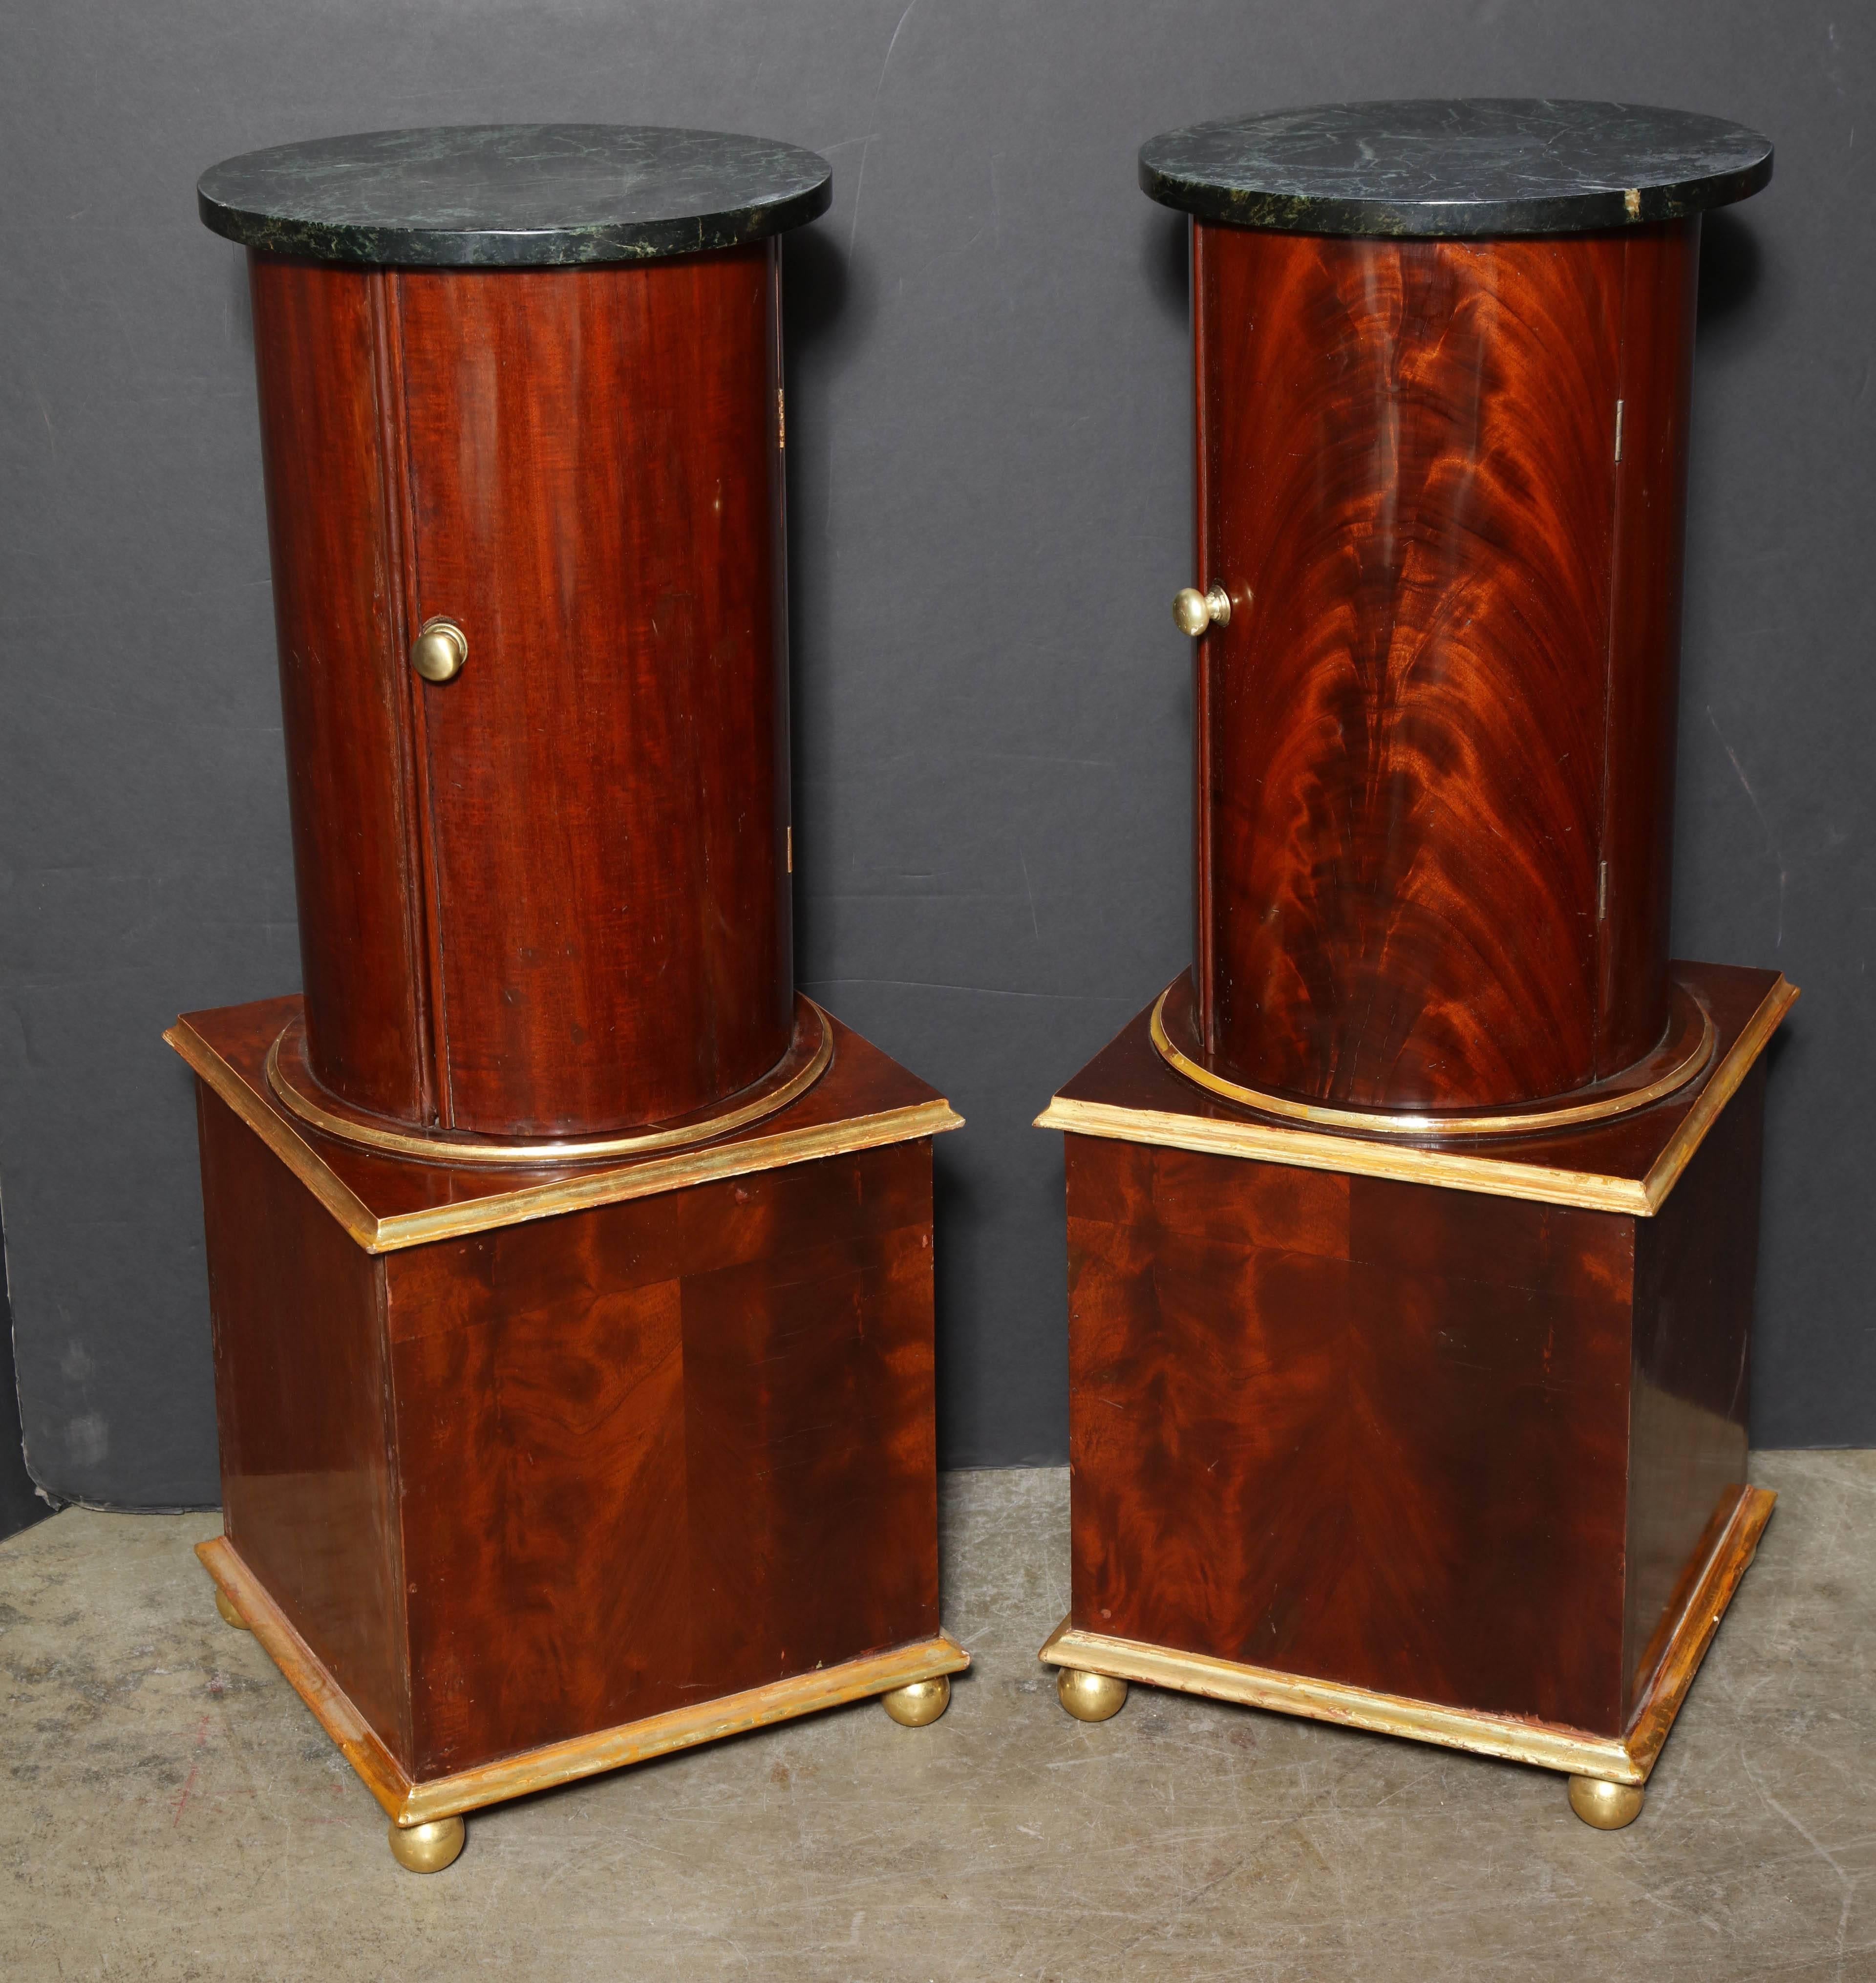 Pair of Baltic marble-top mahogany cylinder form cabinet pedestals on square gilded bun foot bases.